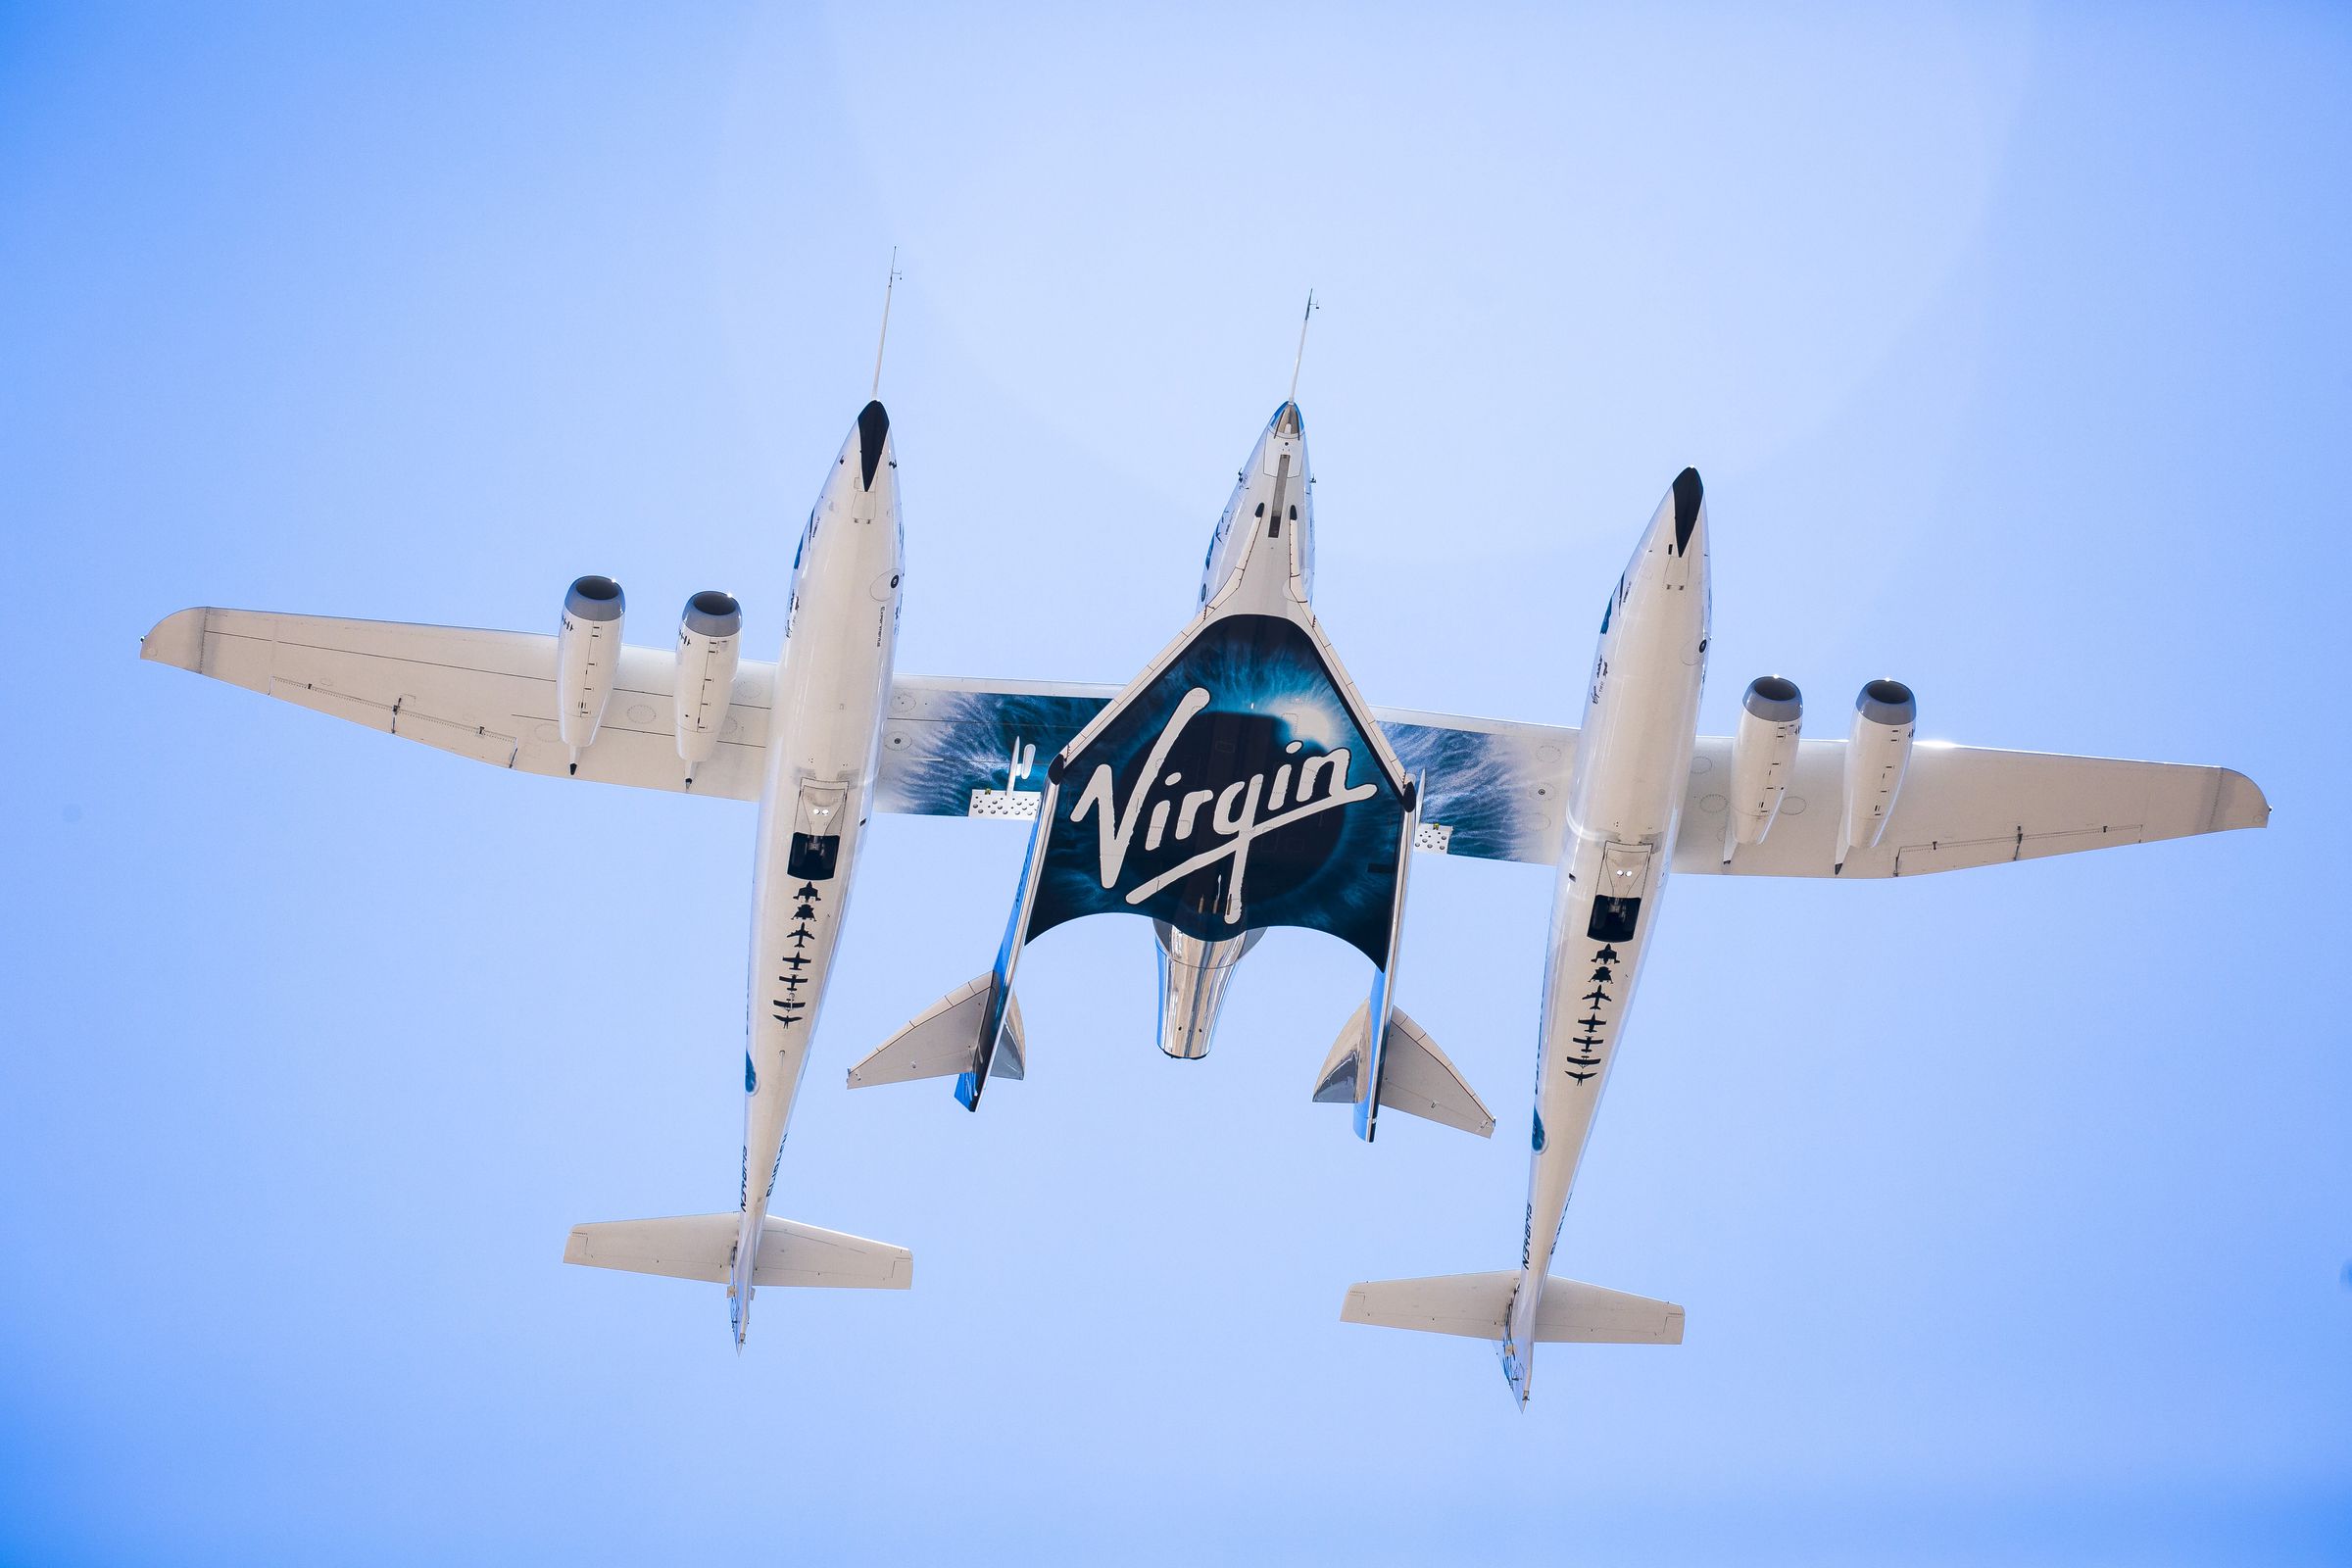 Virgin Galactic’s SpaceShipTwo spaceplane is carried between the two fuselages of its WhiteKnight carrier aircraft during a 2016 test.